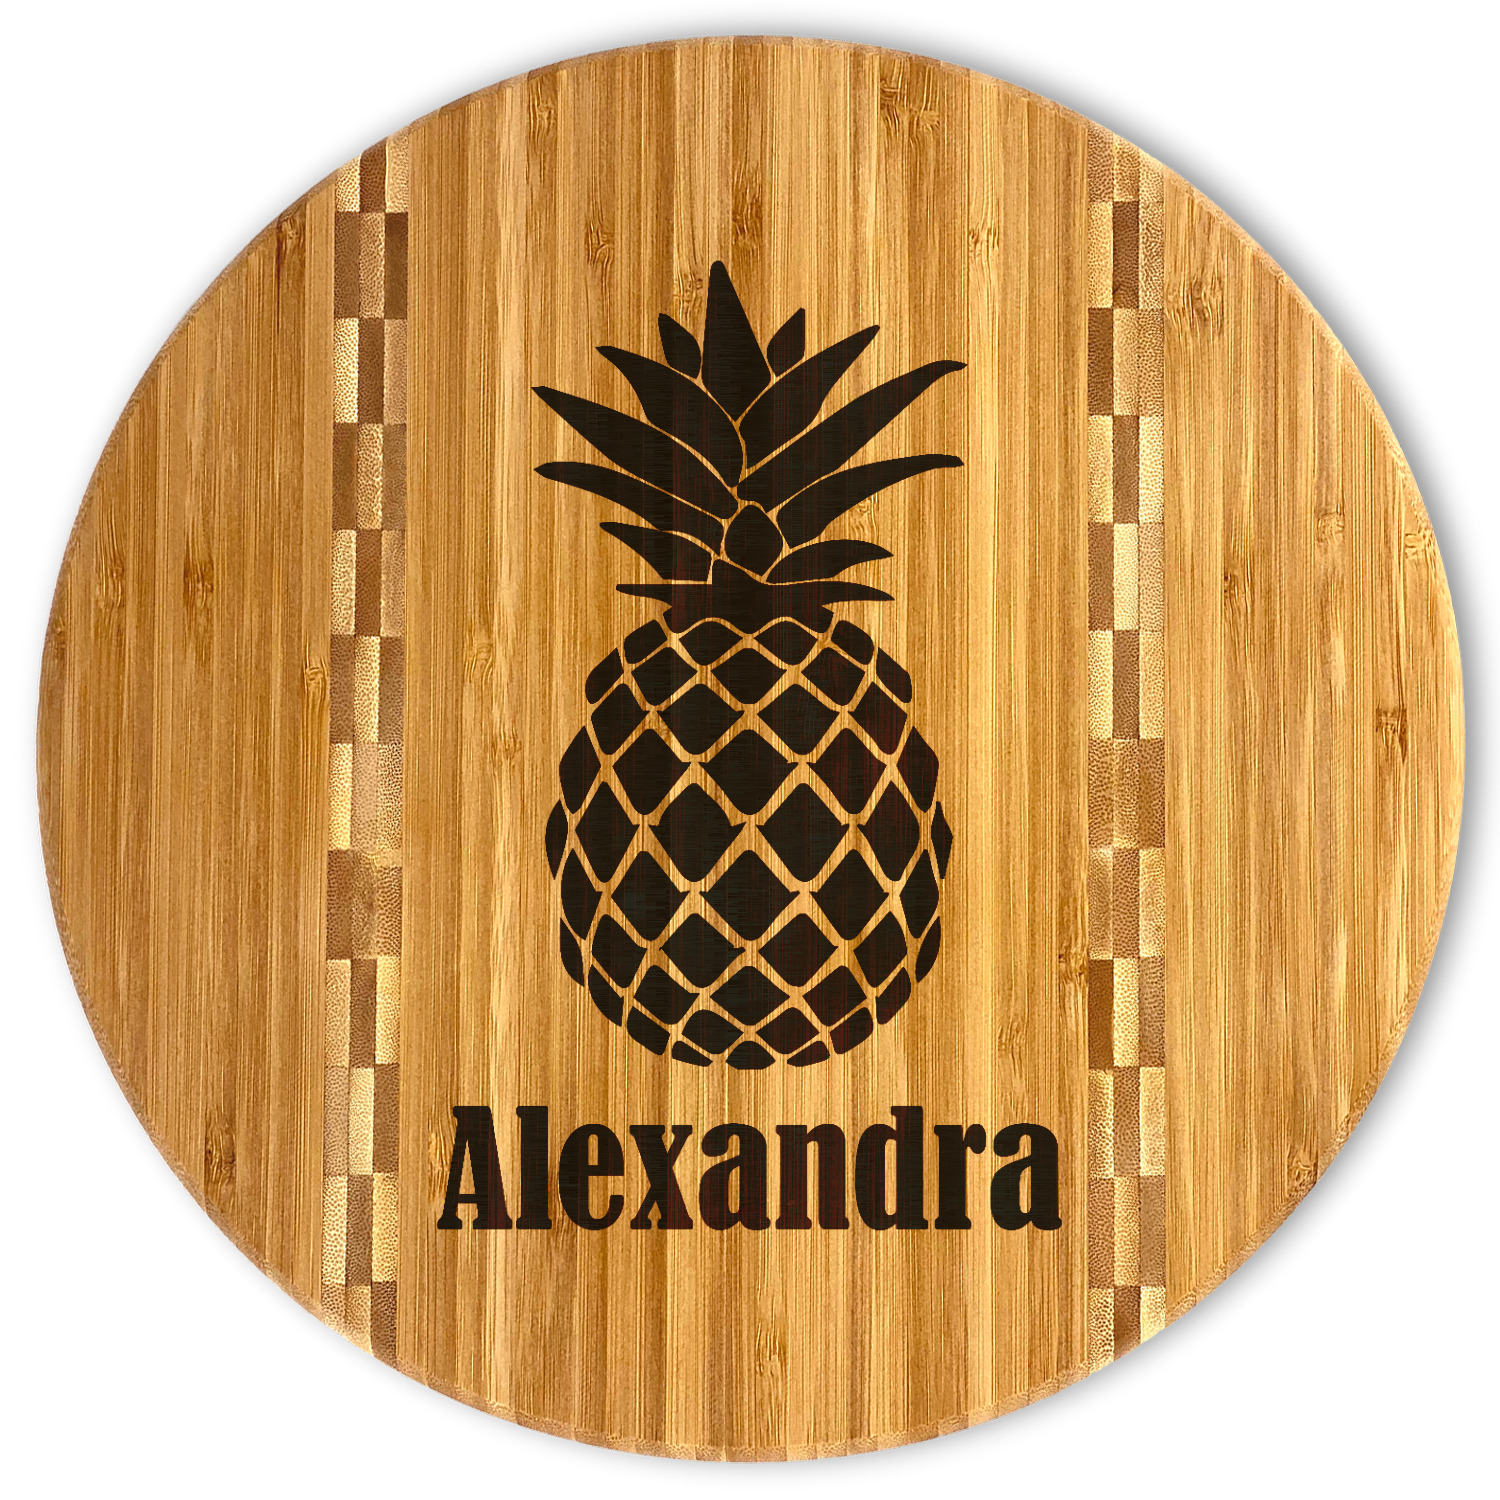 https://www.youcustomizeit.com/common/MAKE/1112526/Pineapples-Bamboo-Cutting-Boards-FRONT.jpg?lm=1658265522